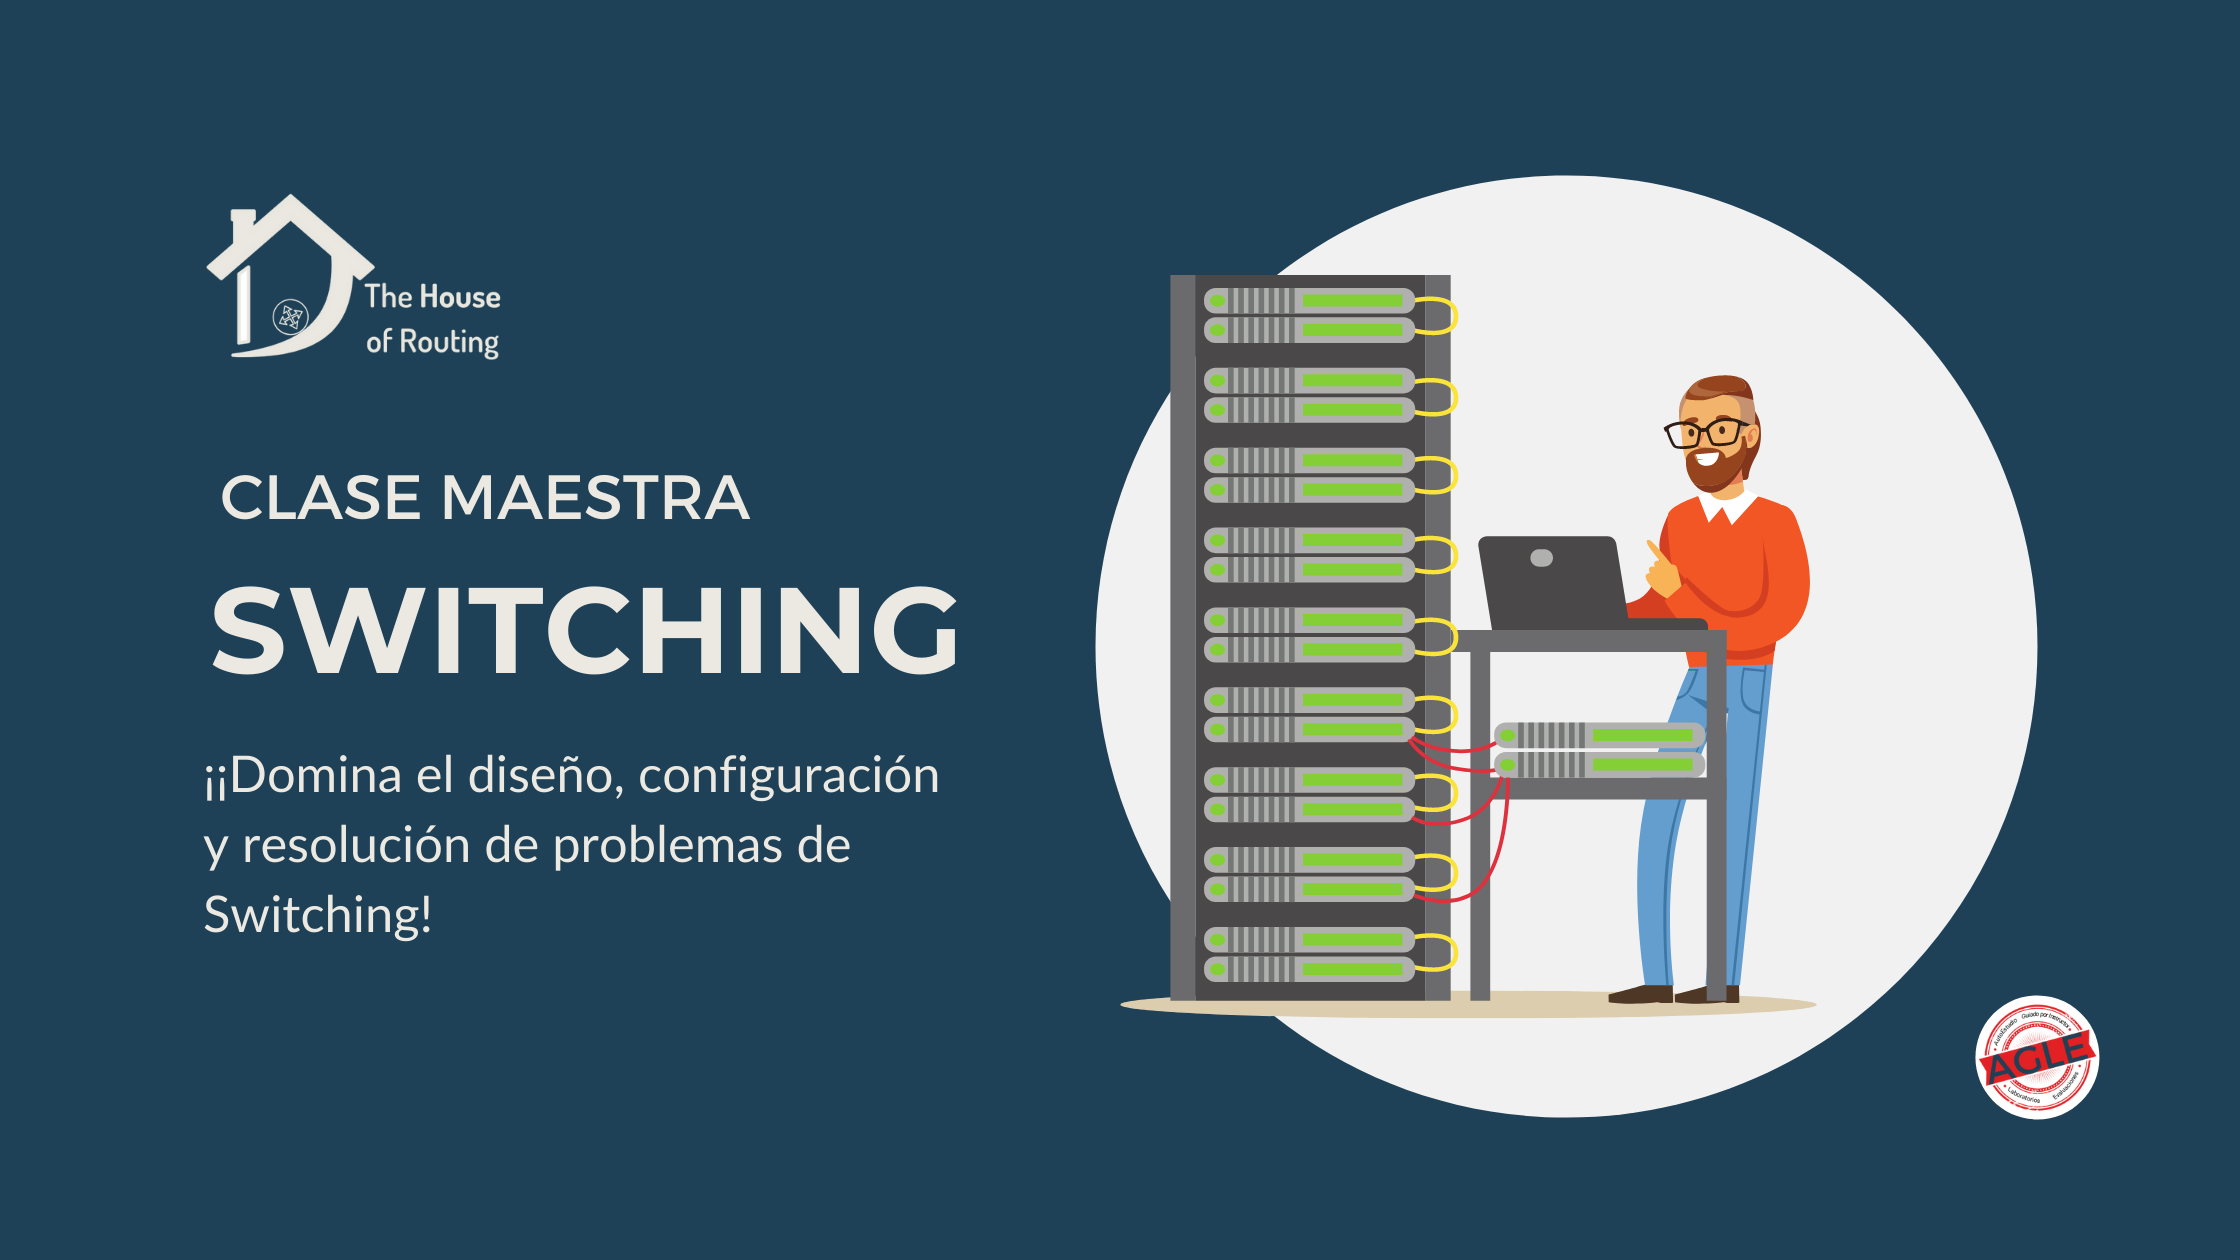 Clase Maestra de Switching en The House of Routing